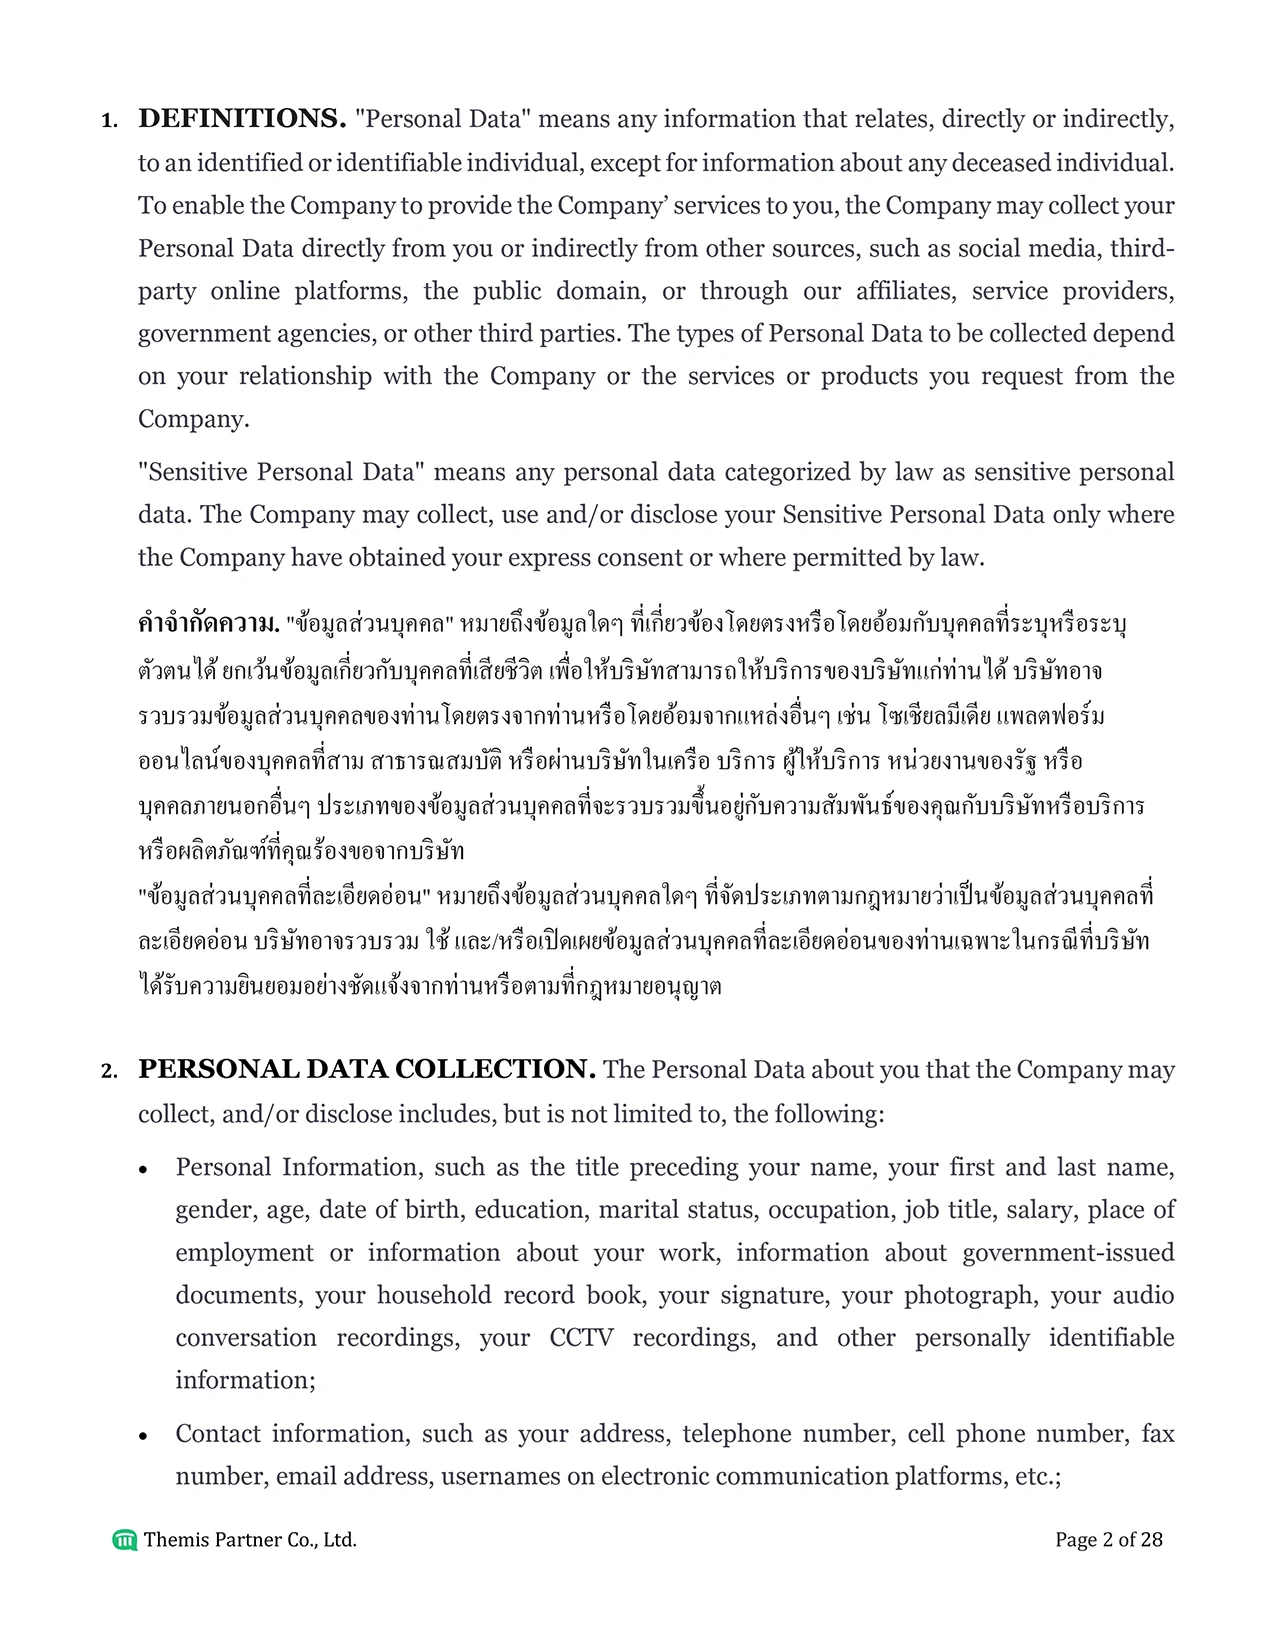 PDPA consent form and company policy Thailand 2